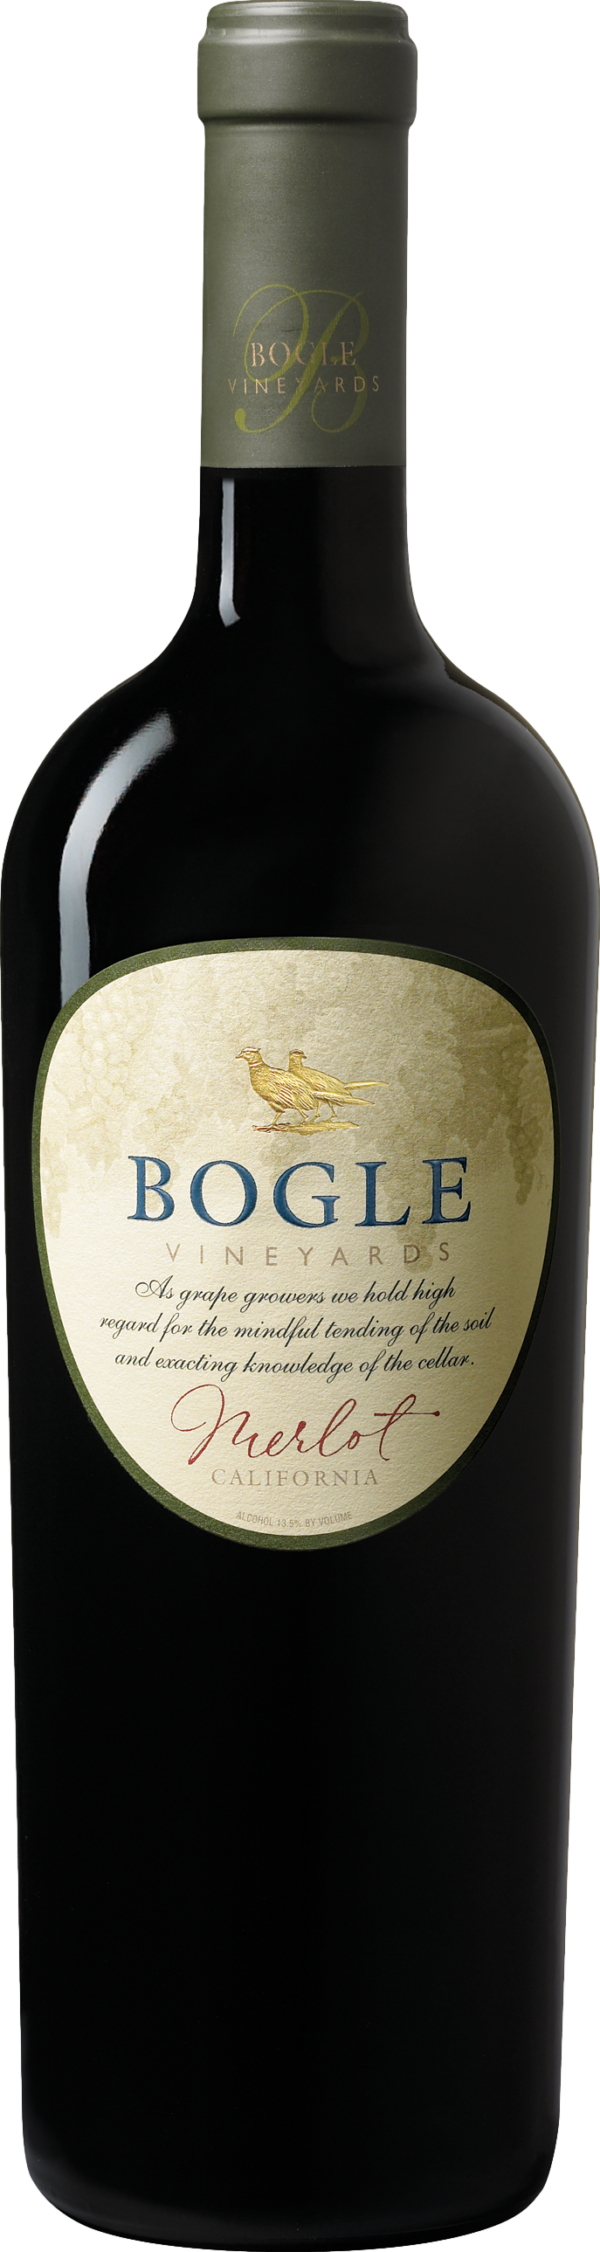 Product image of Bogle Merlot 2019 from 8wines